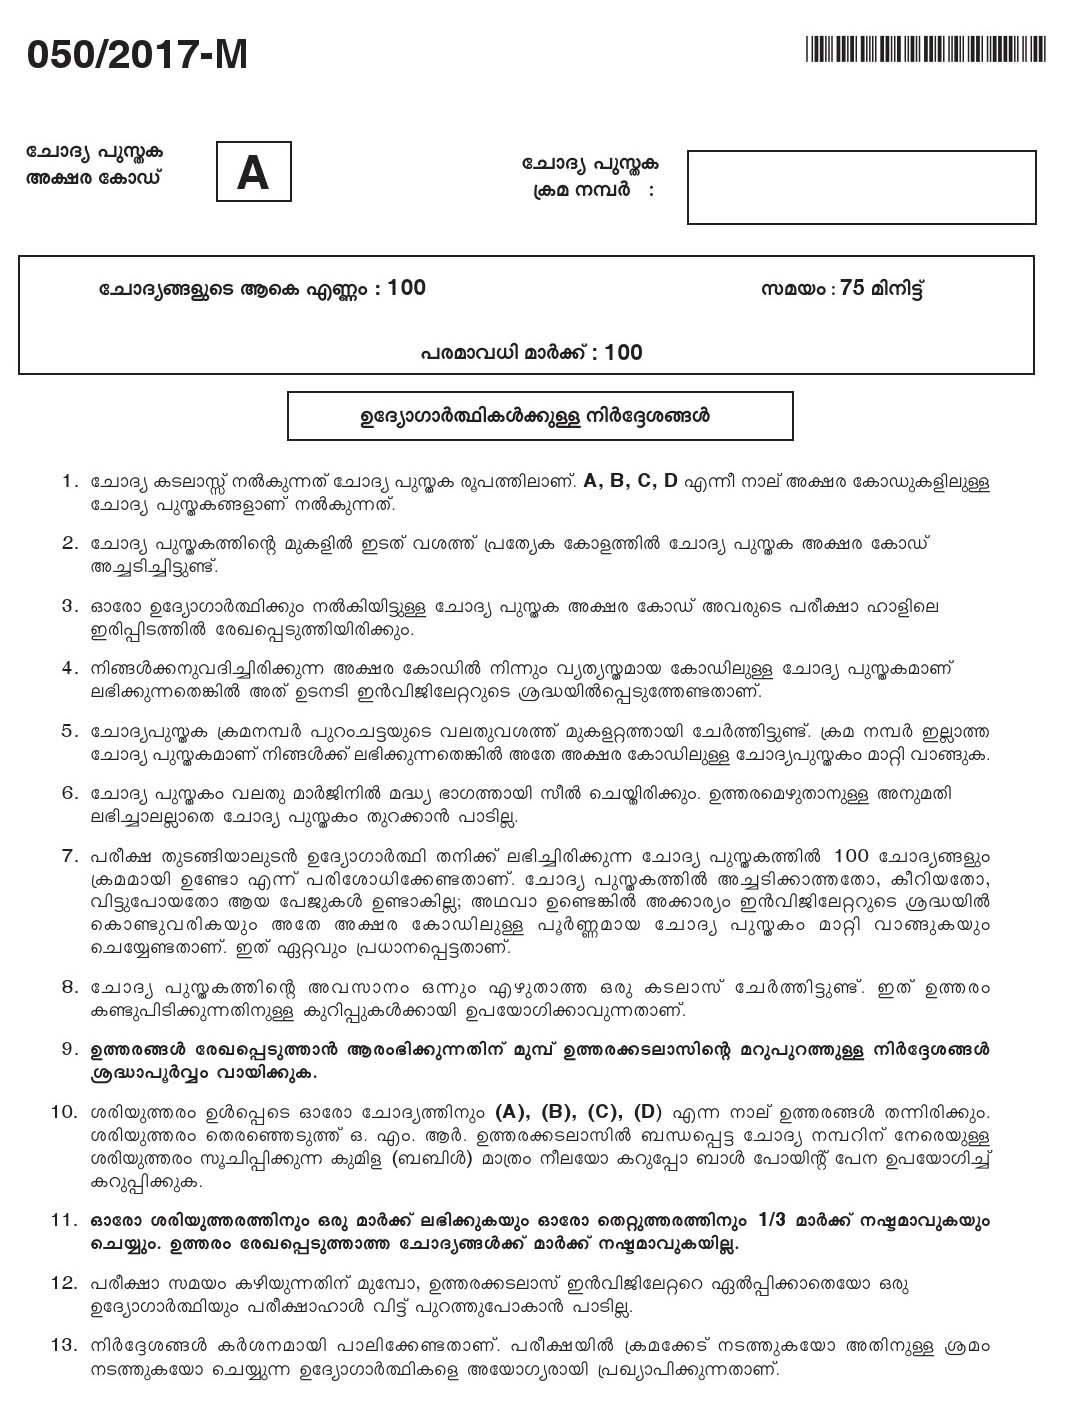 LD Clerk Question Paper 2017 Malayalam Paper Code 0502017 M 1